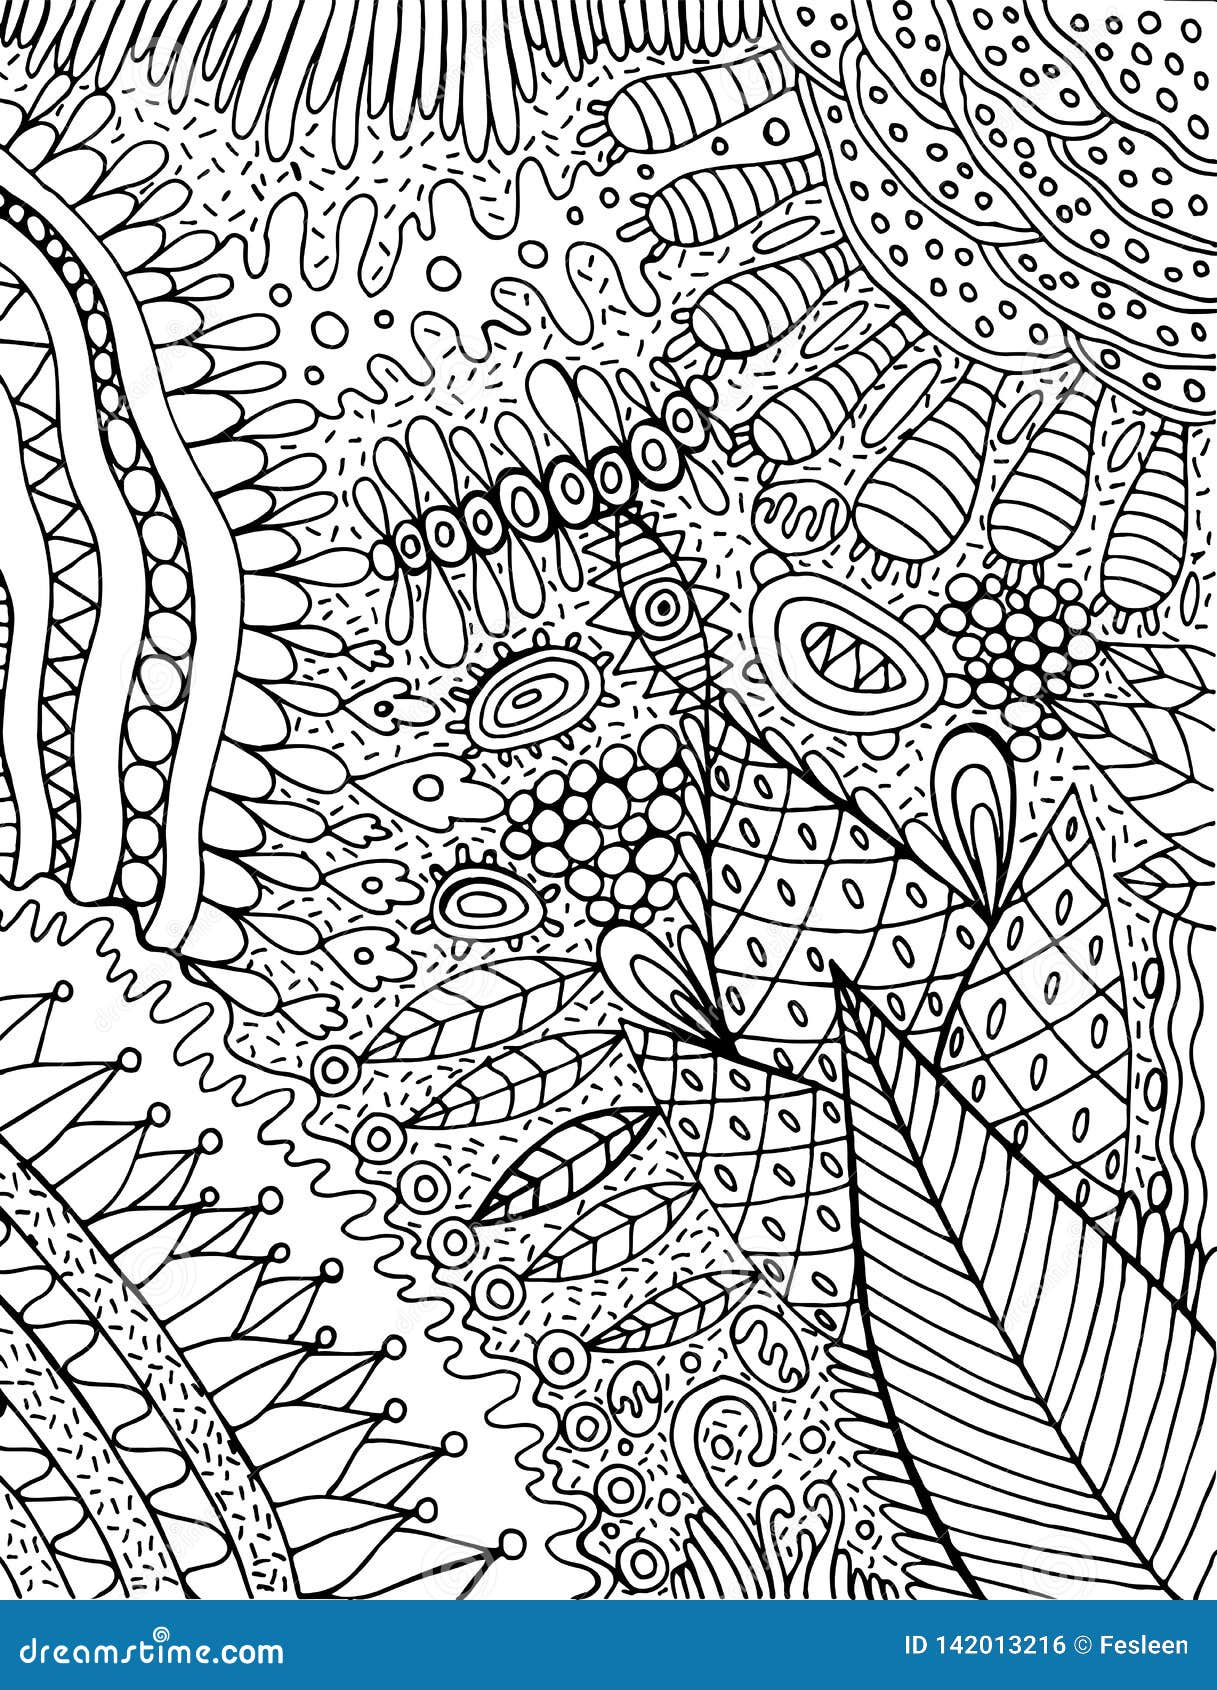 Coloring Page for Adults with Floral Cartoon Background. Doodle Ink Graphic Art  for Adults Stock Vector - Illustration of outline, page: 142013216